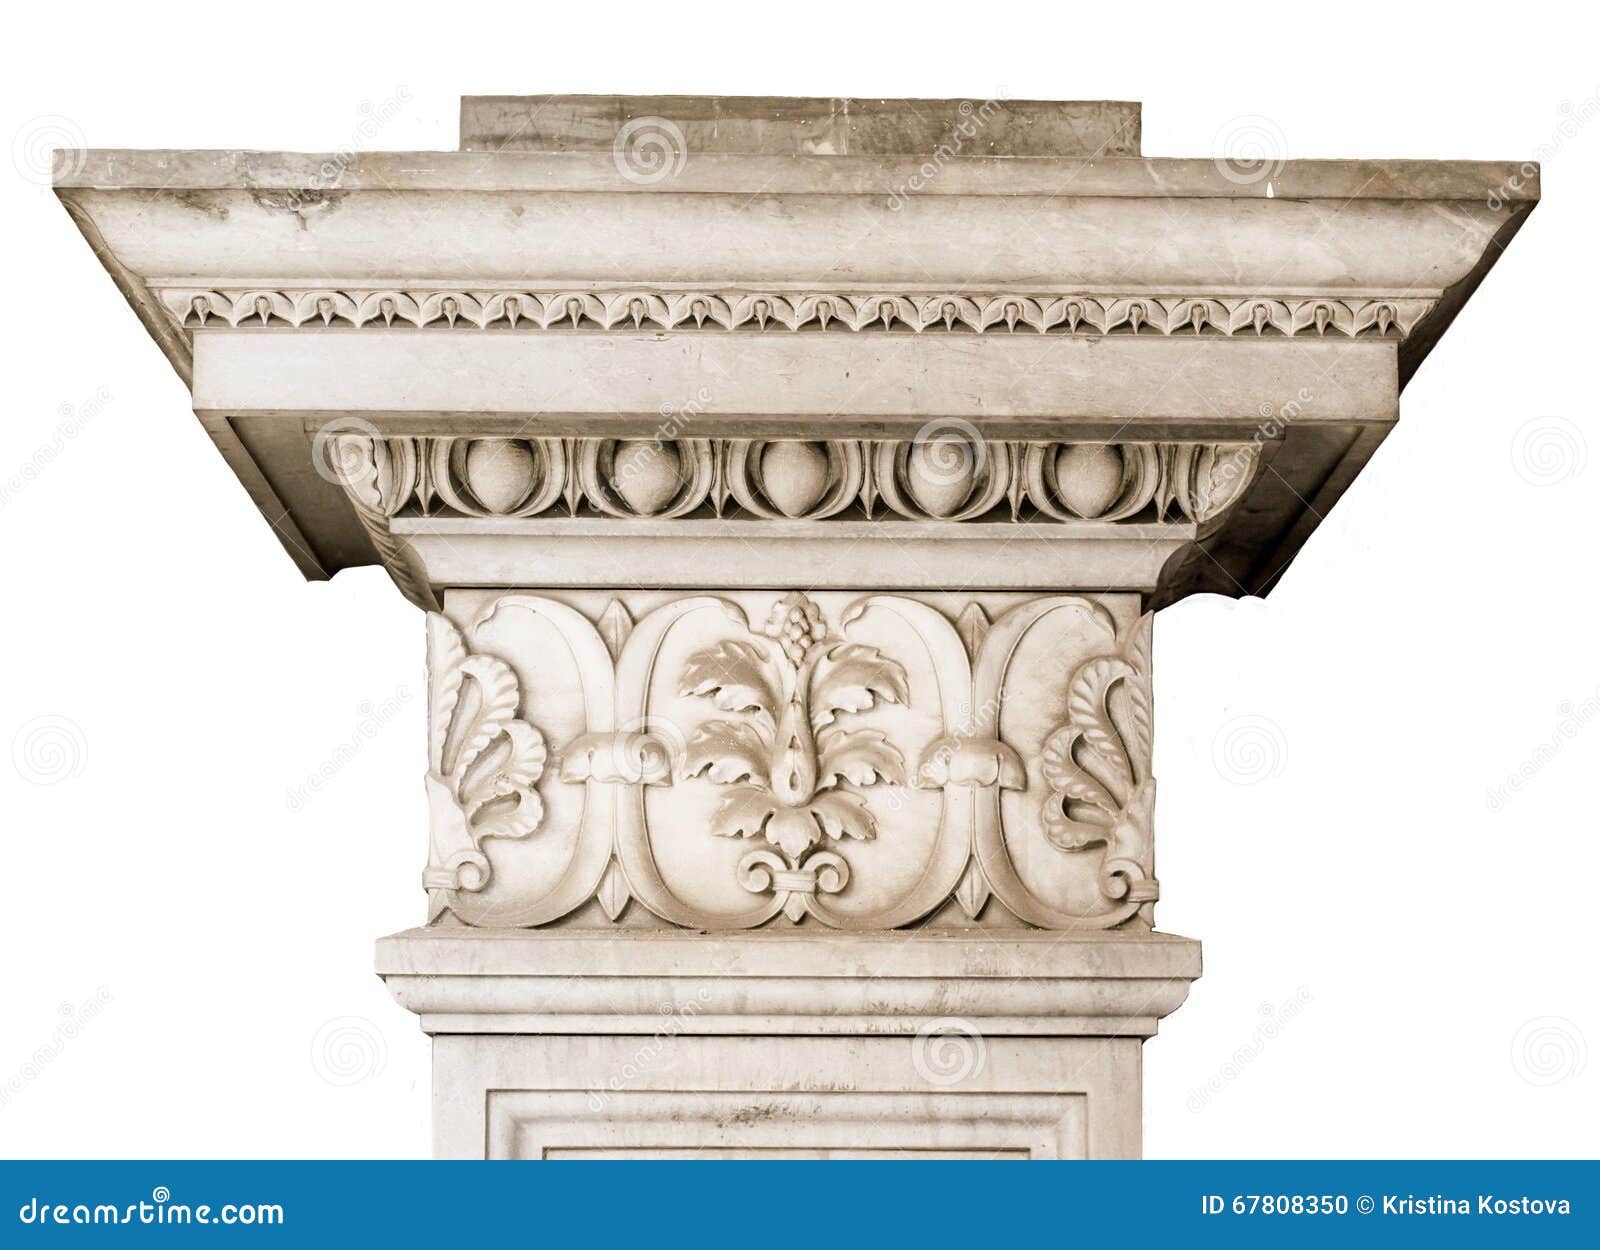 beautiful marble architectonic decoration with floral s